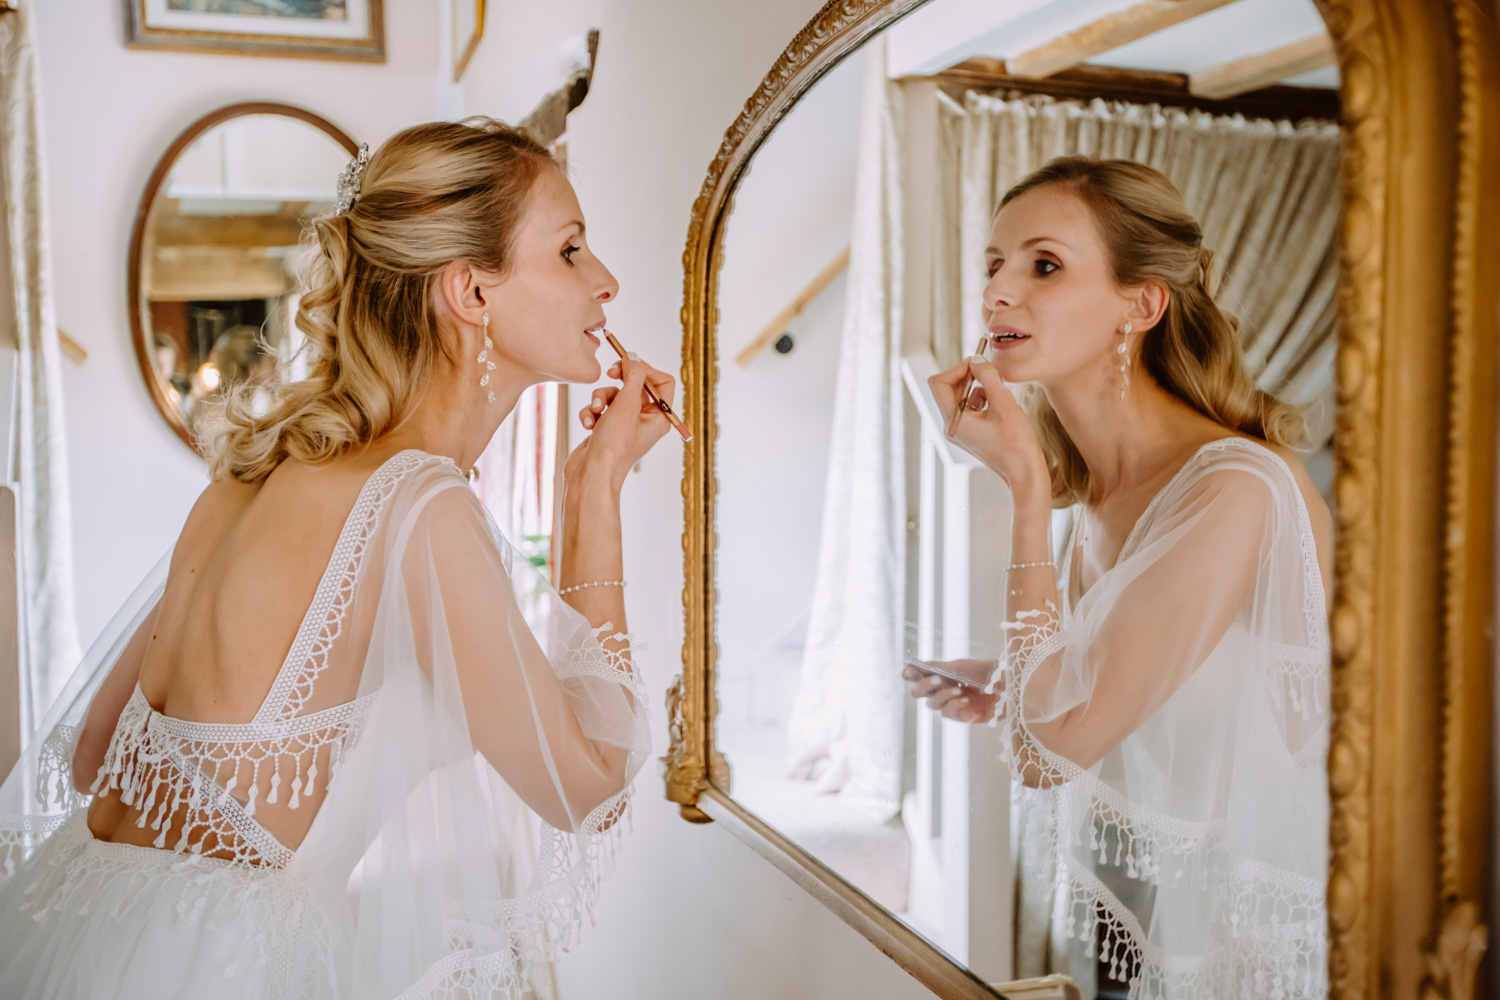 The bride applies the lipstick while looking into the mirror 